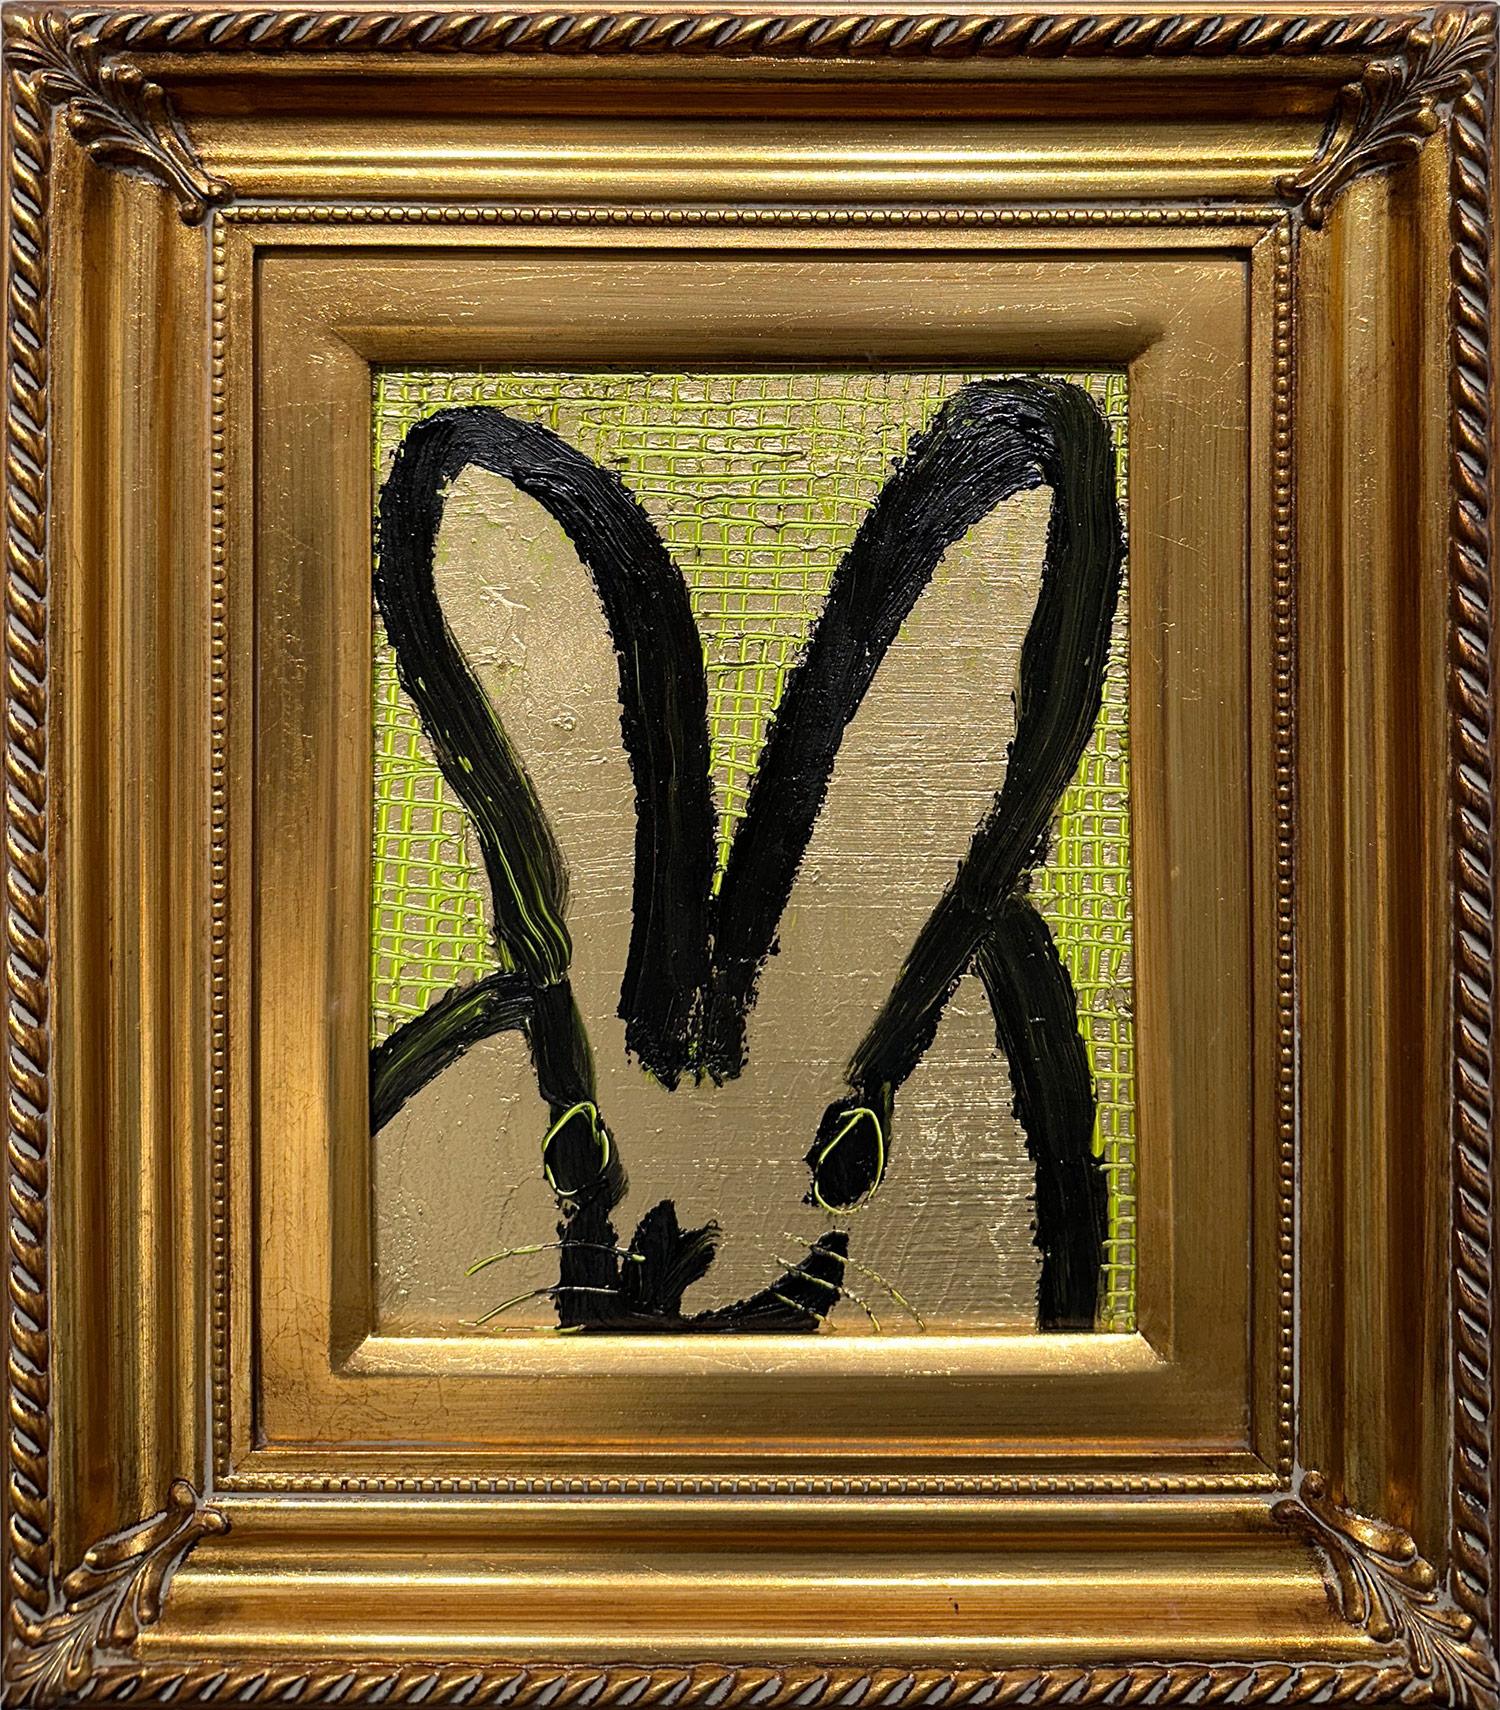 Hunt Slonem Abstract Painting - "Scored" Black Bunny on Golden Background with Lime Green Accents & Scoring 